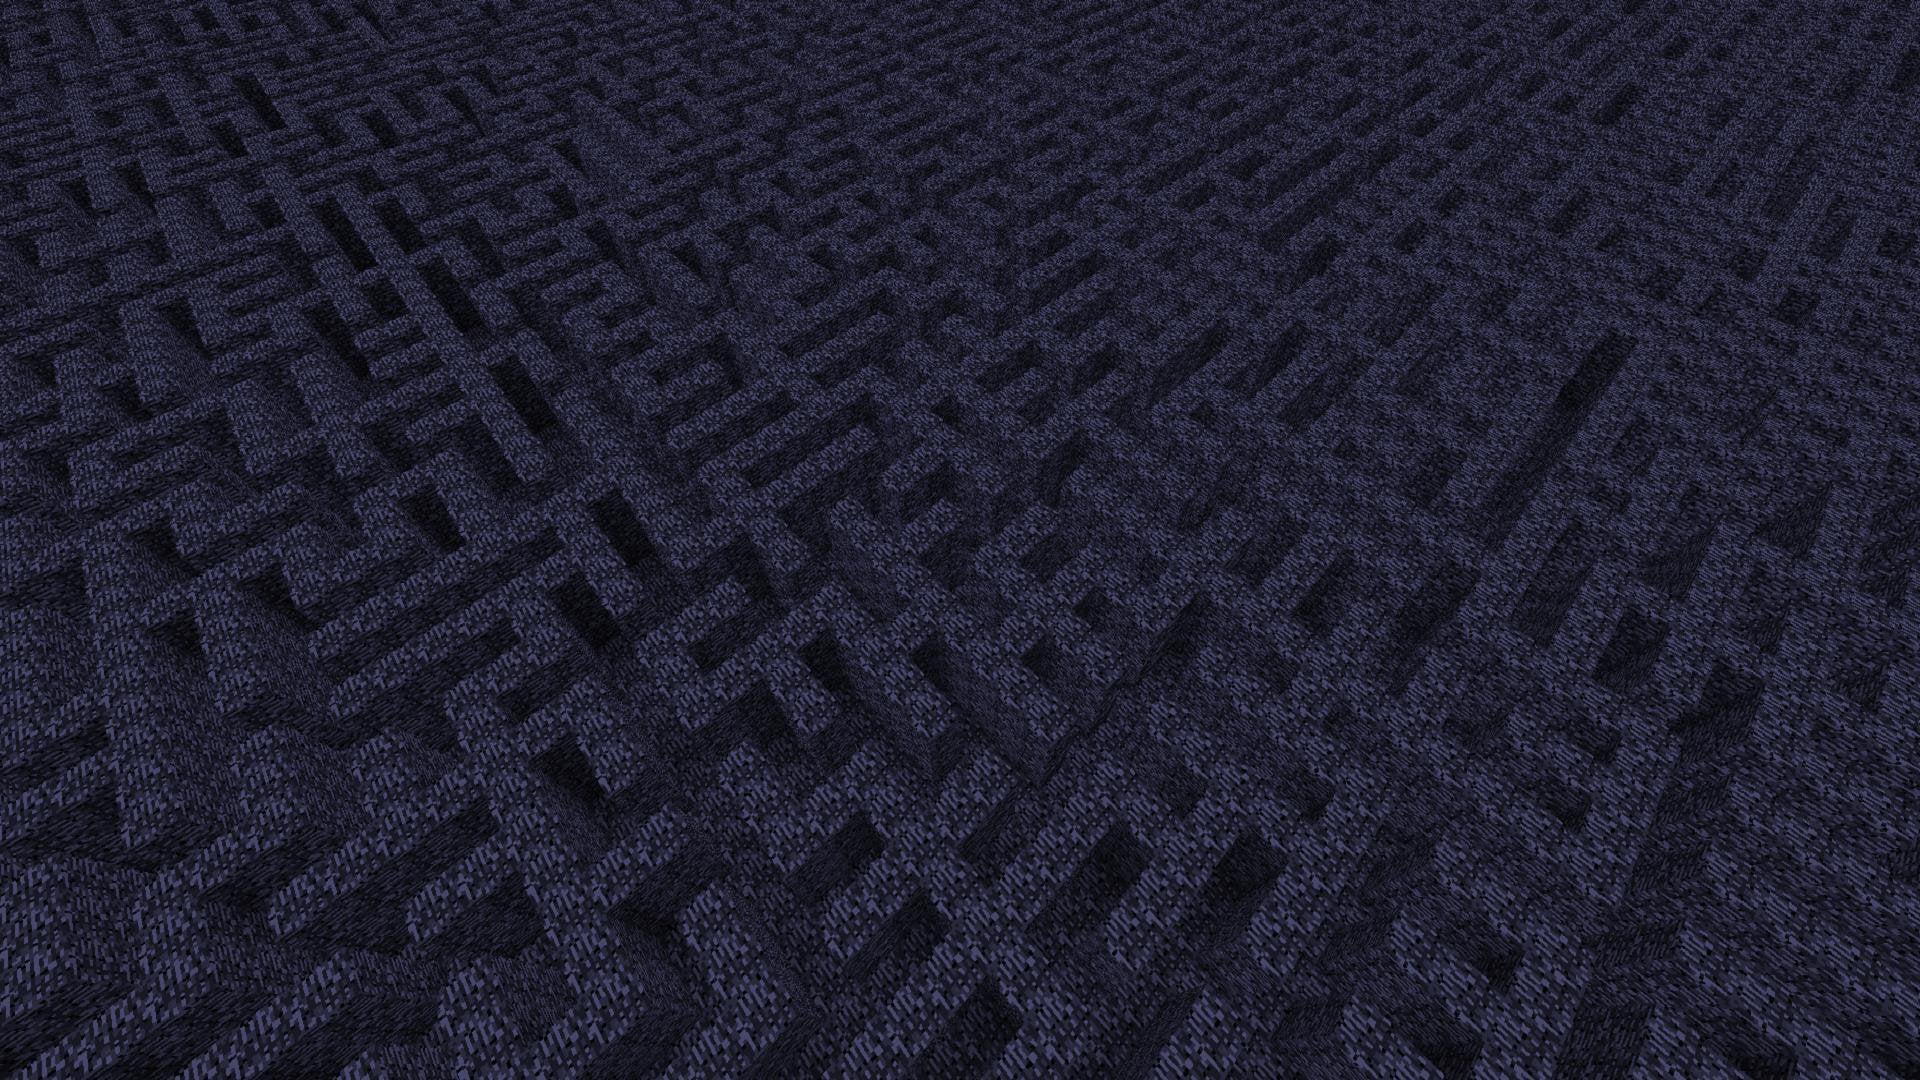 Wallpaper] I thought you guys might like this, I present you the Bedrock Maze. [1920x1080]